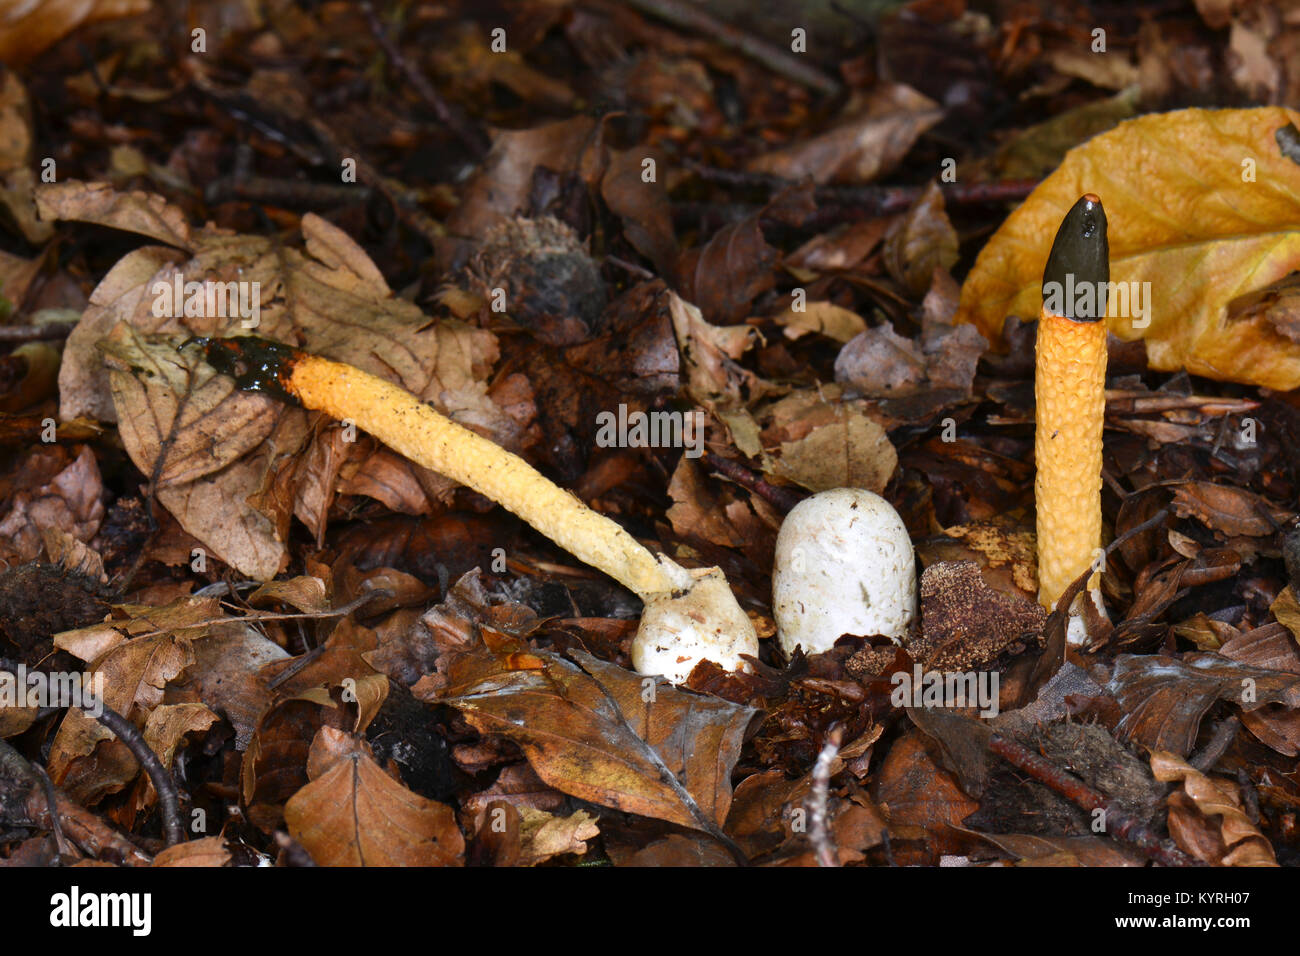 Dog Stinkhorn (Mutinus caninus), young fungus capsule between the elder fruiting bodies on the forest floor Stock Photo